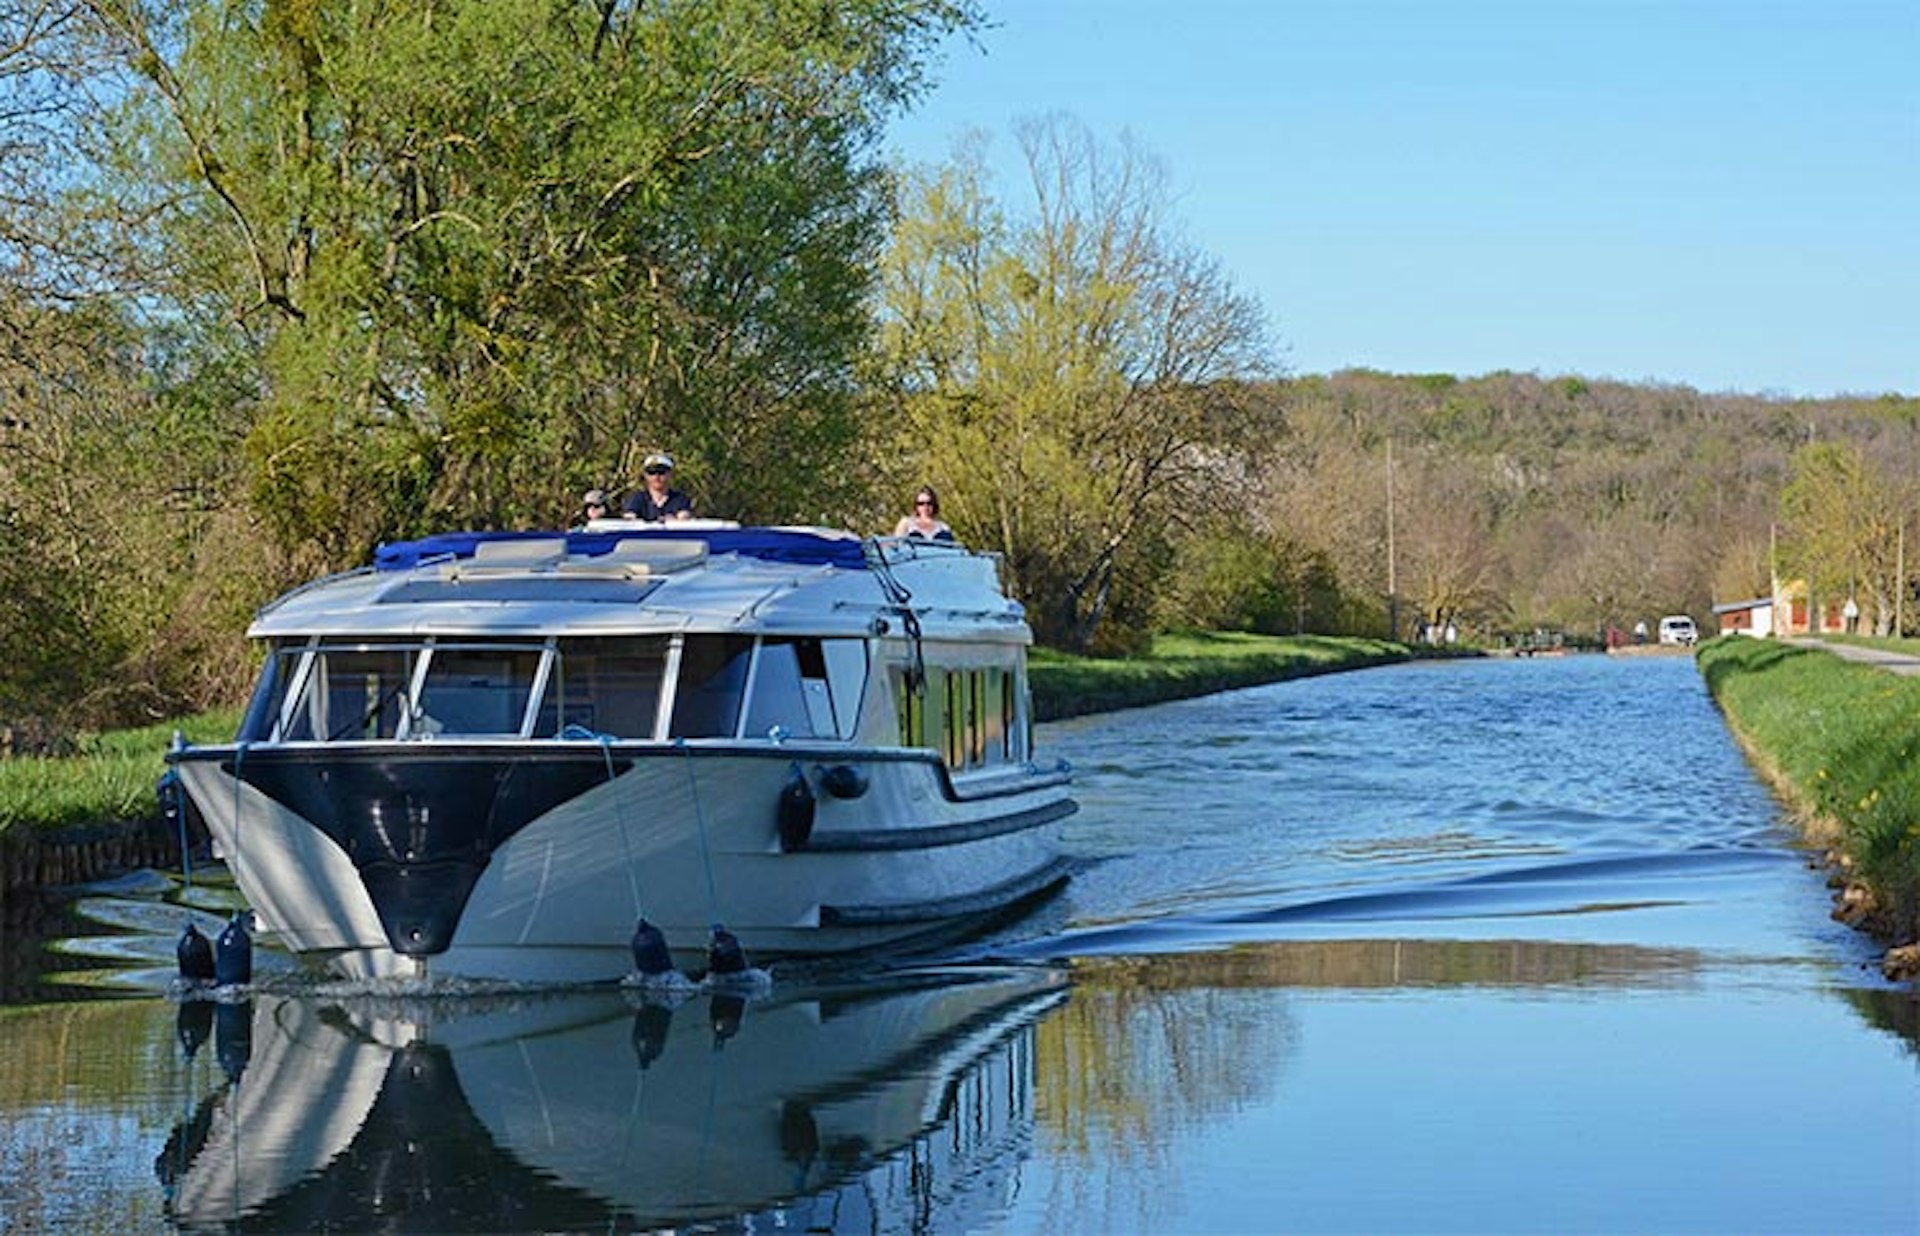 See a slower-paced France aboard a boat, like this cruiser on the Canal du Nivernais. Image by Patrick Kinsella / Lonely Planet